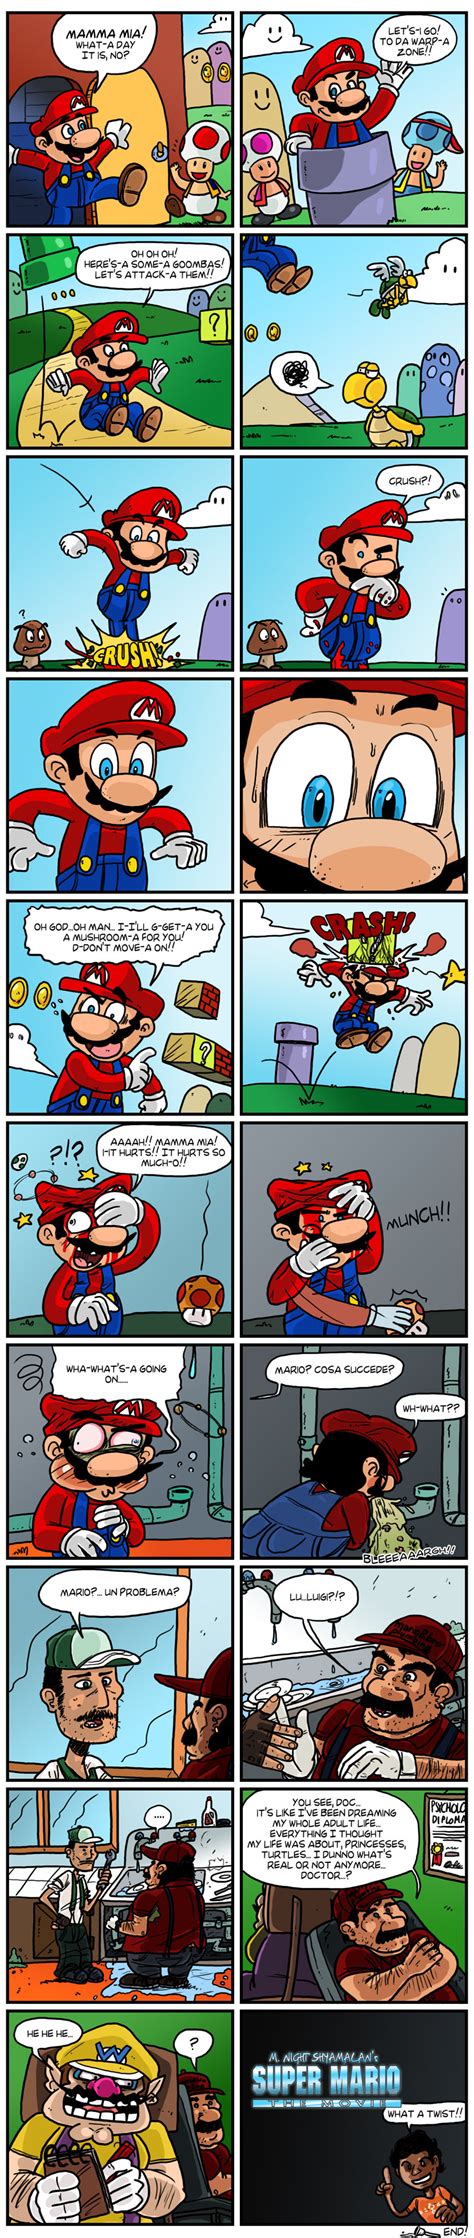 Mario Comics Funny Pictures And Best Jokes Comics Images